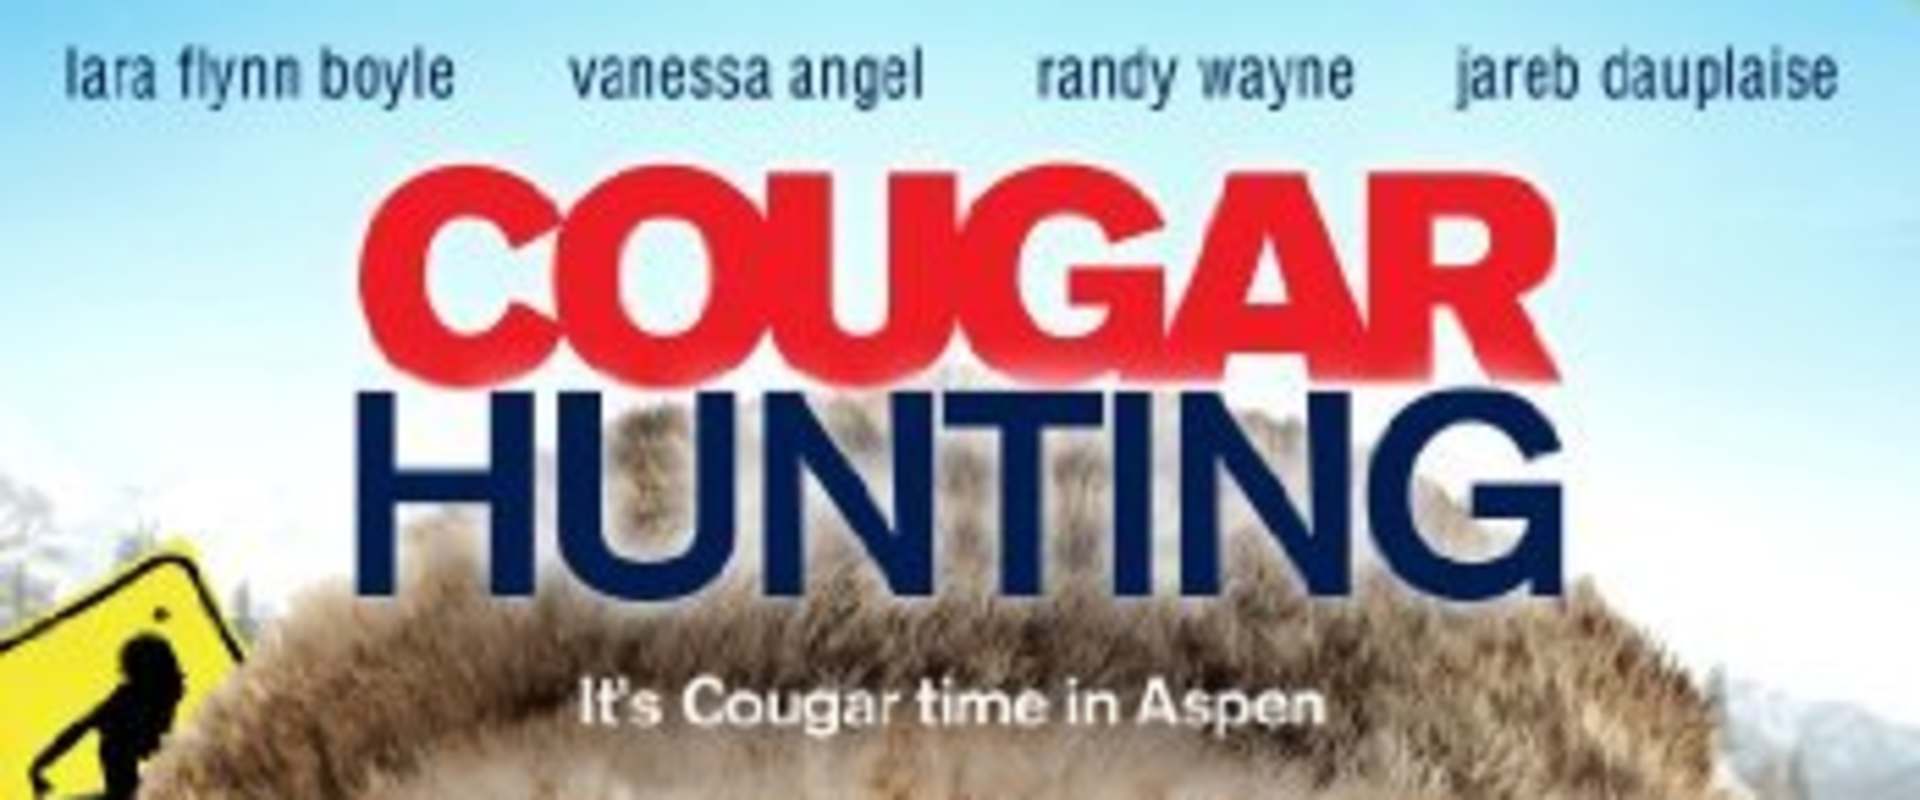 Cougar Hunting background 2